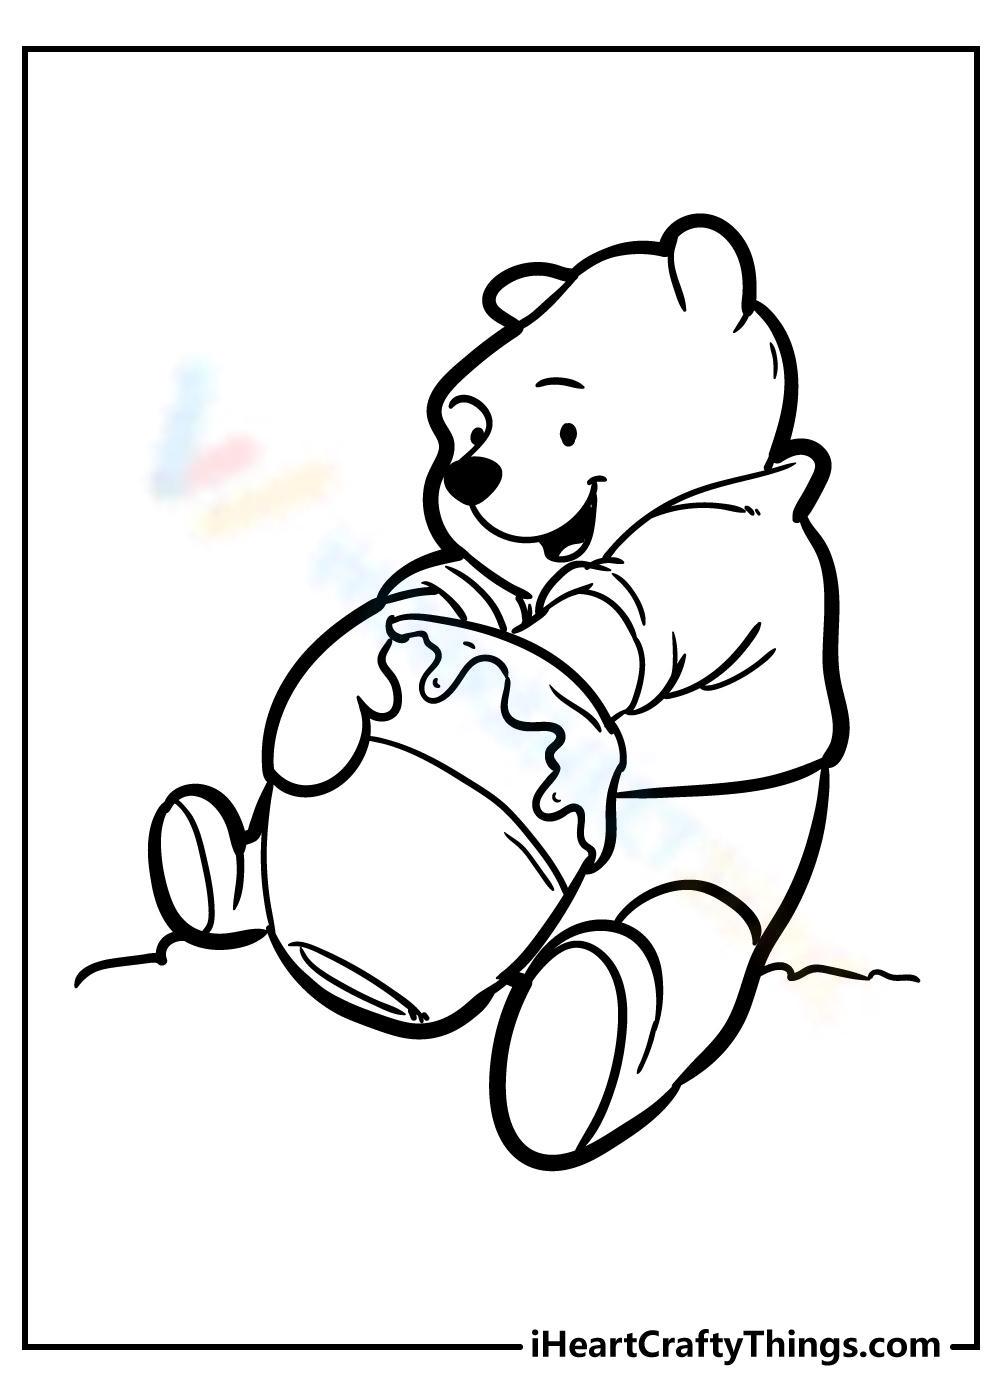 Free printable winnie the pooh coloring pages for kids